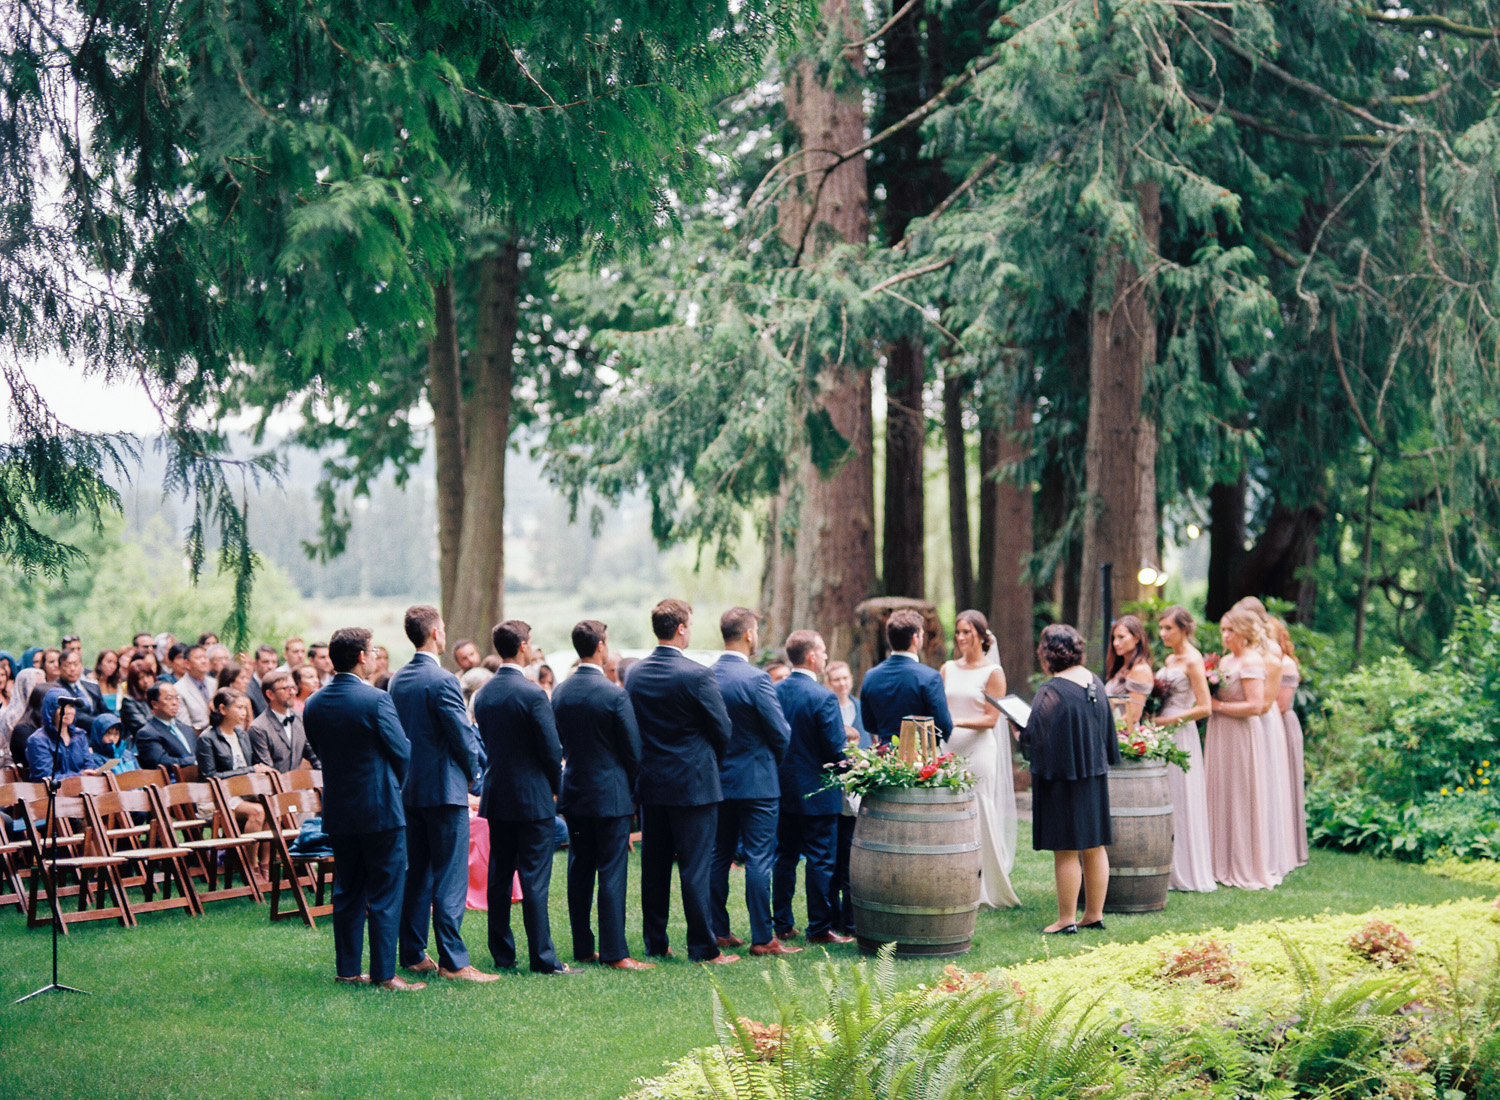 delille cellars woodinville winery wedding venue outdoor ceremony photography.jpg